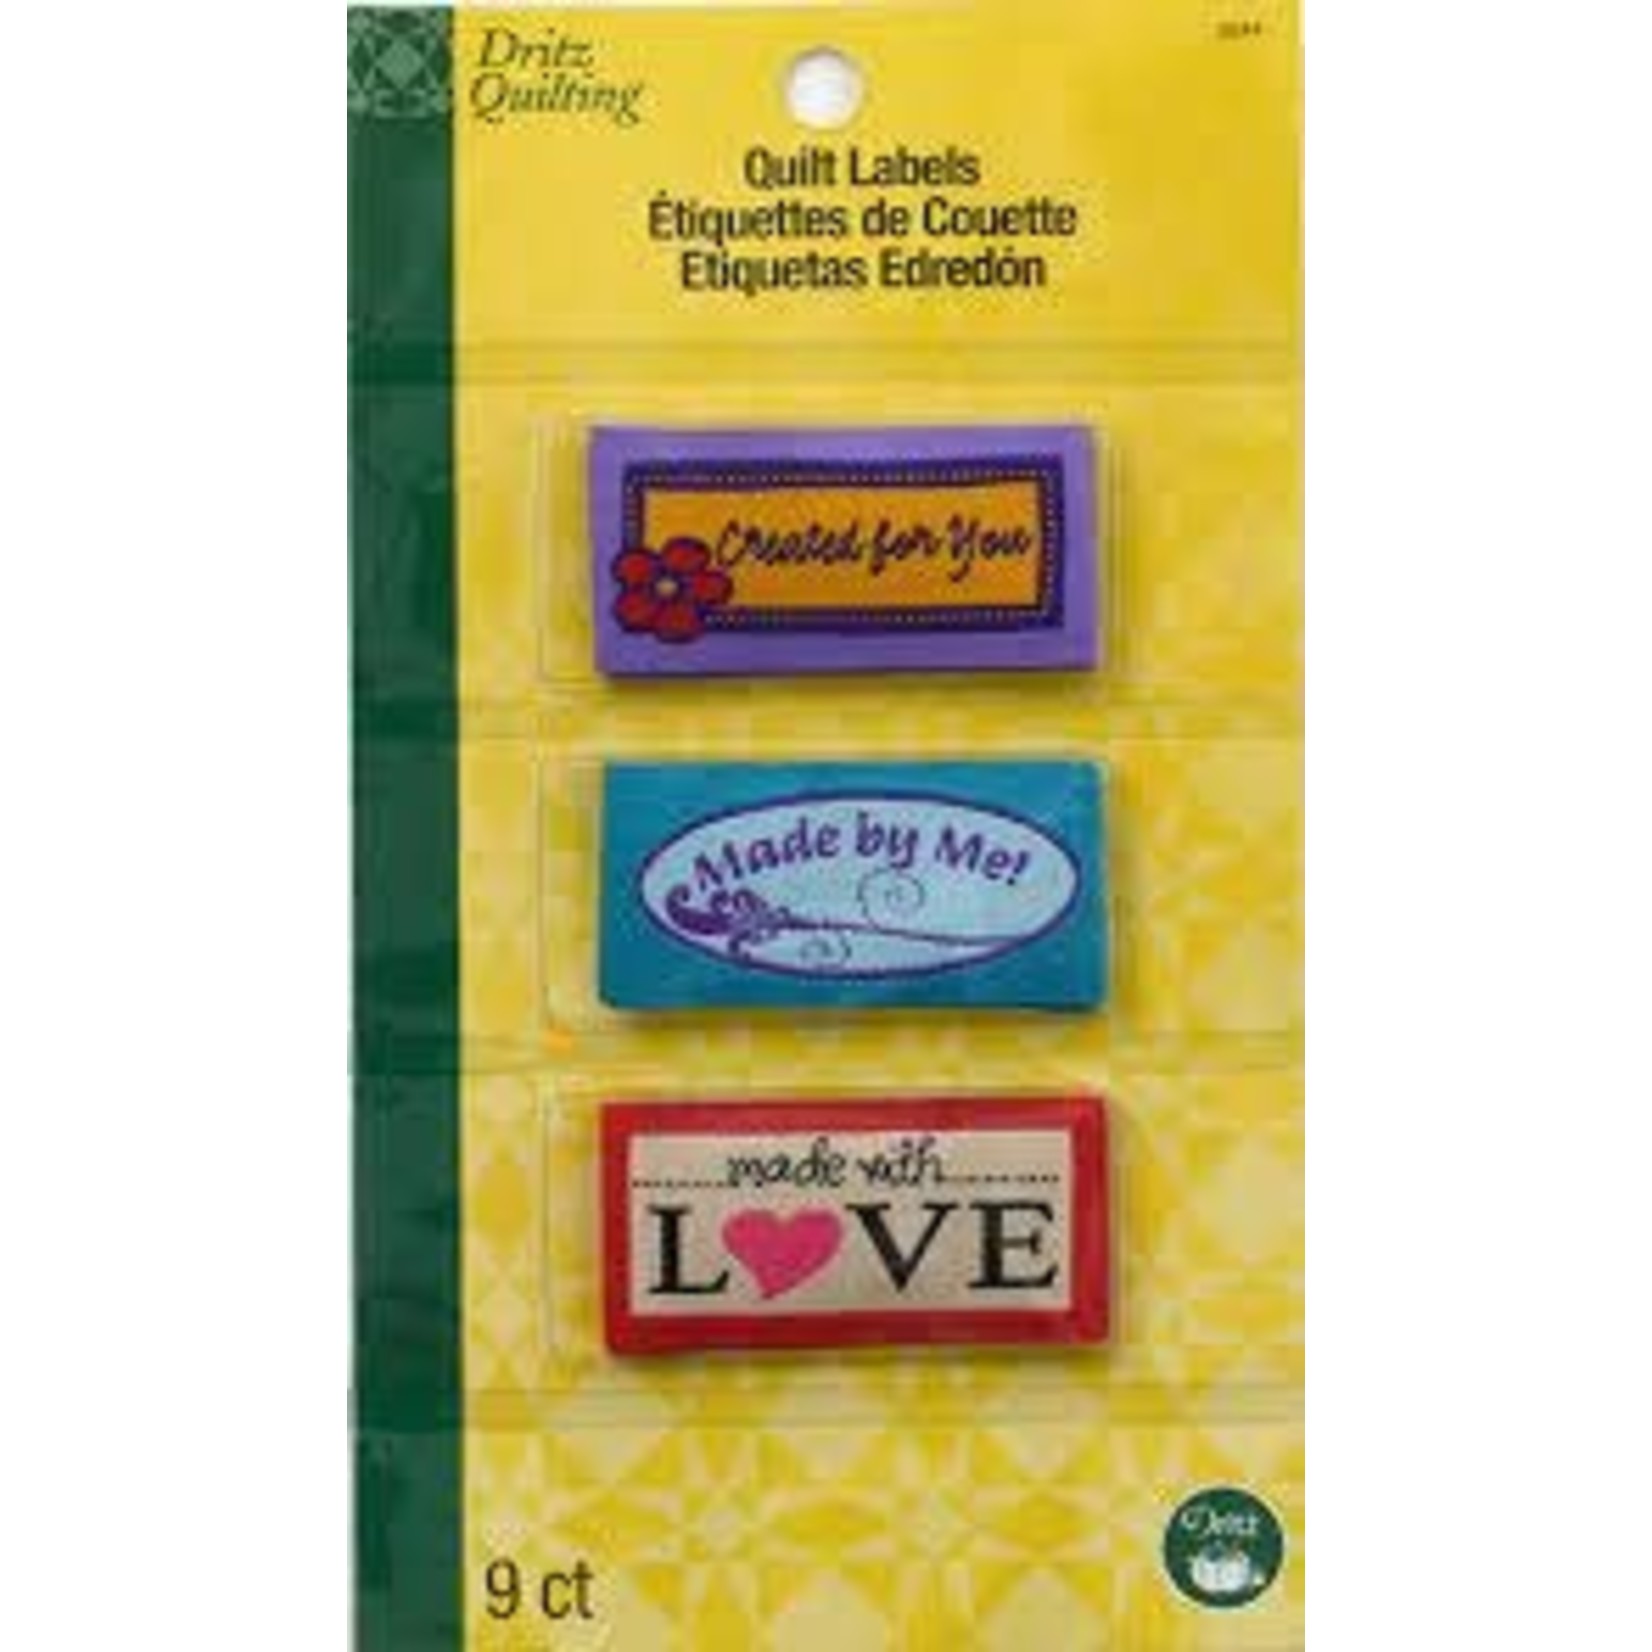 QUILT LABELS - MADE WITH LOVE